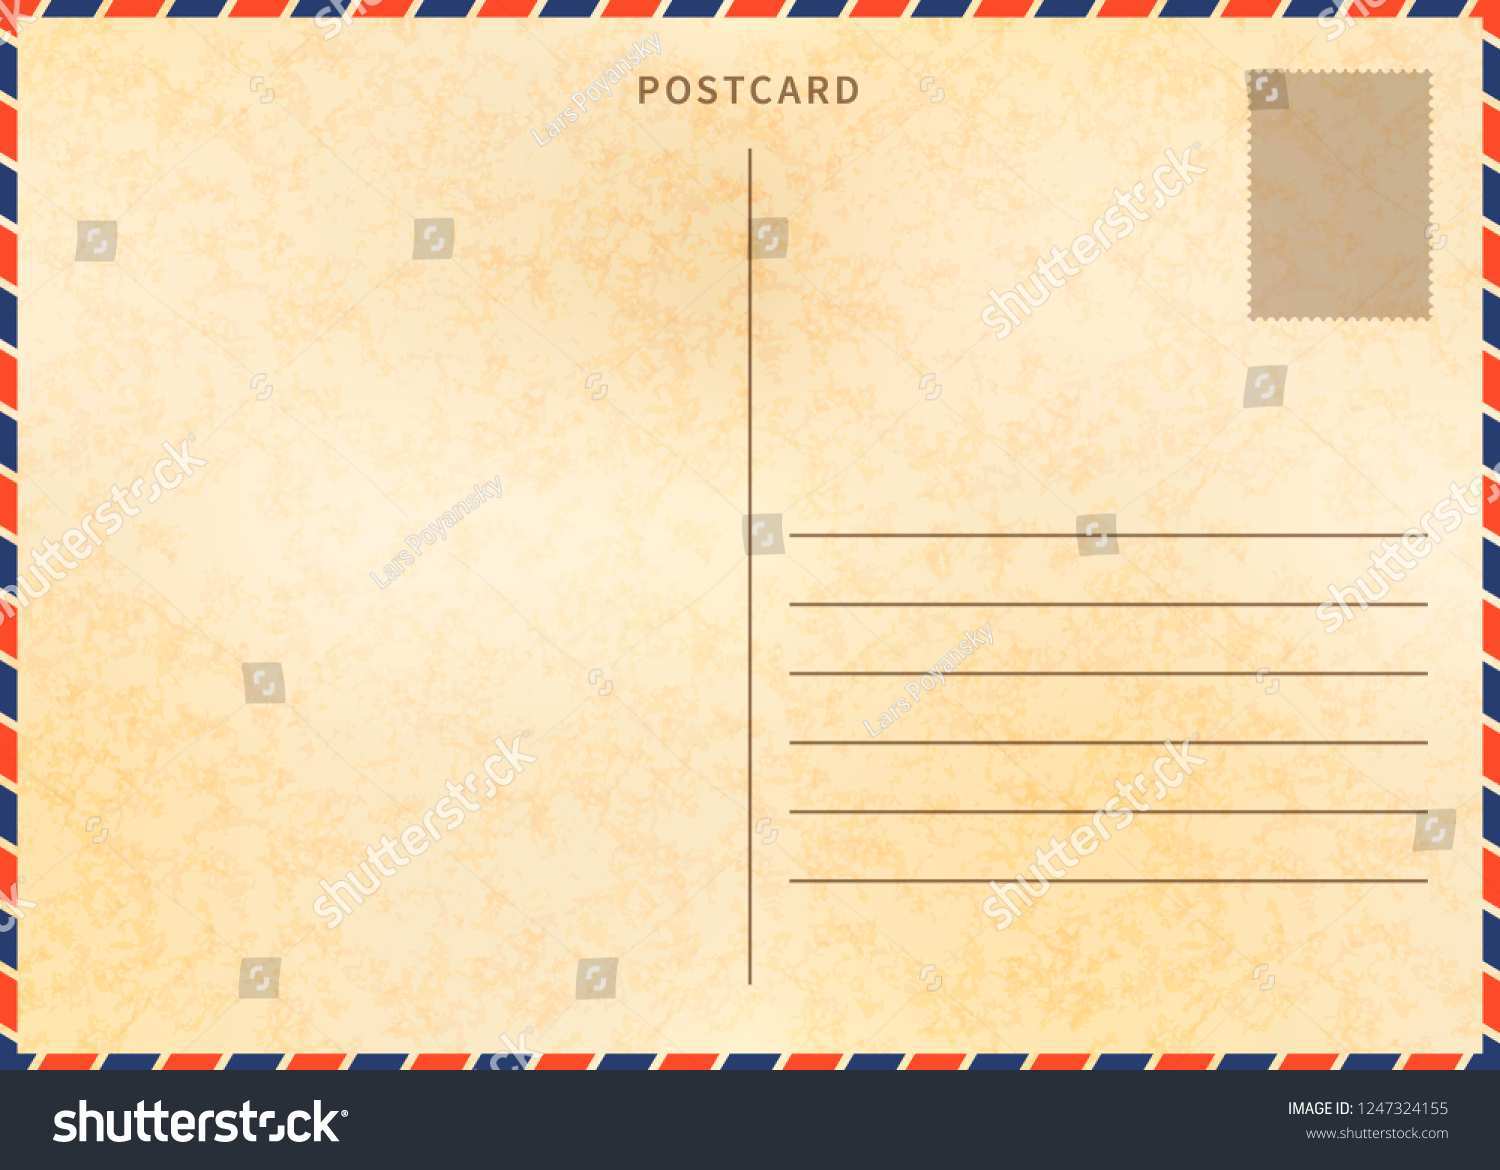 23 Customize Our Free A Blank Postcard Template Download by A Blank Postcard Template